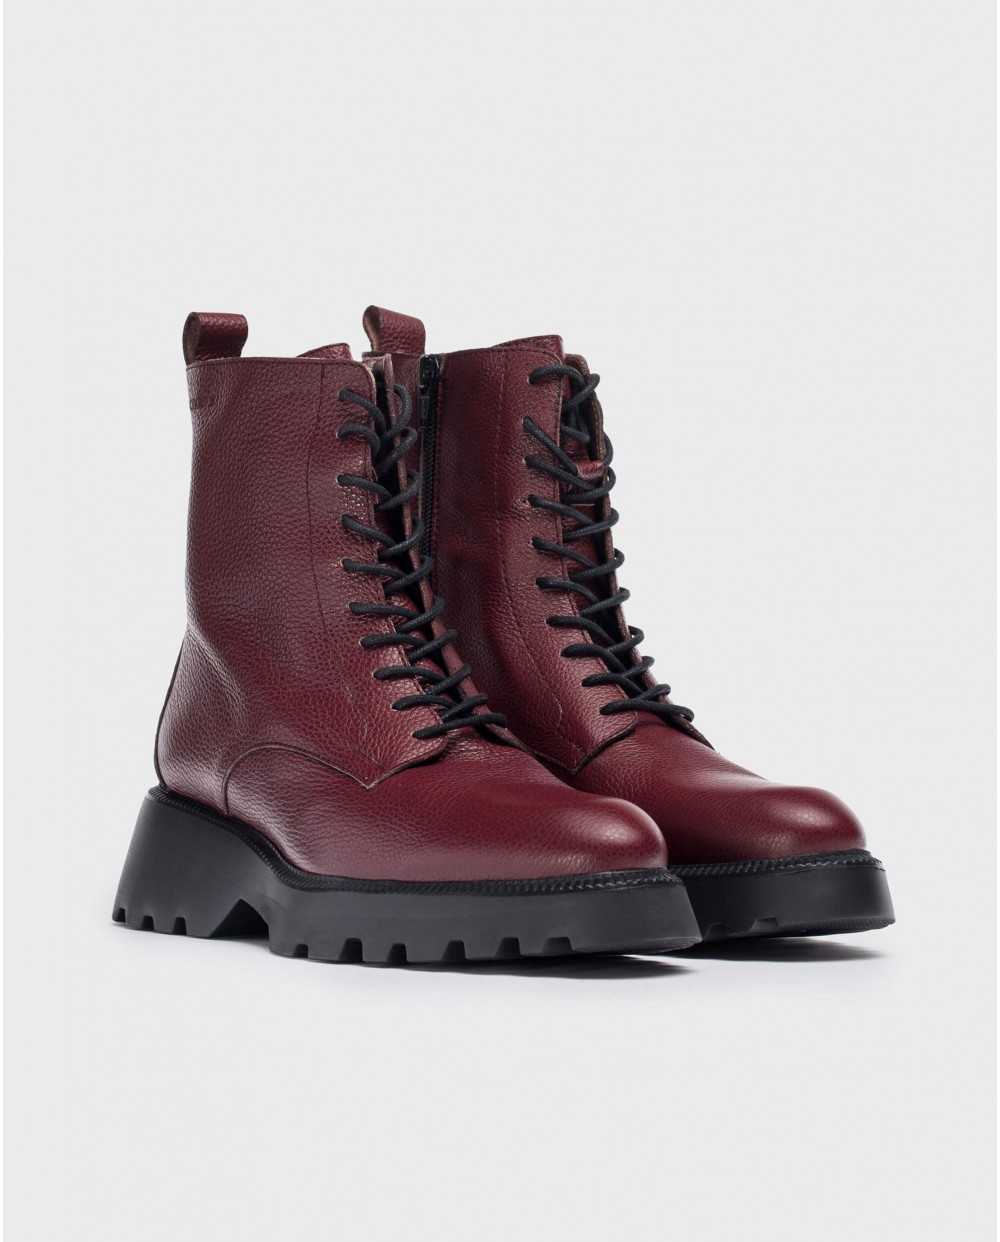 Wonders-Ankle Boots-Burgundy leather ATARI ankle boot